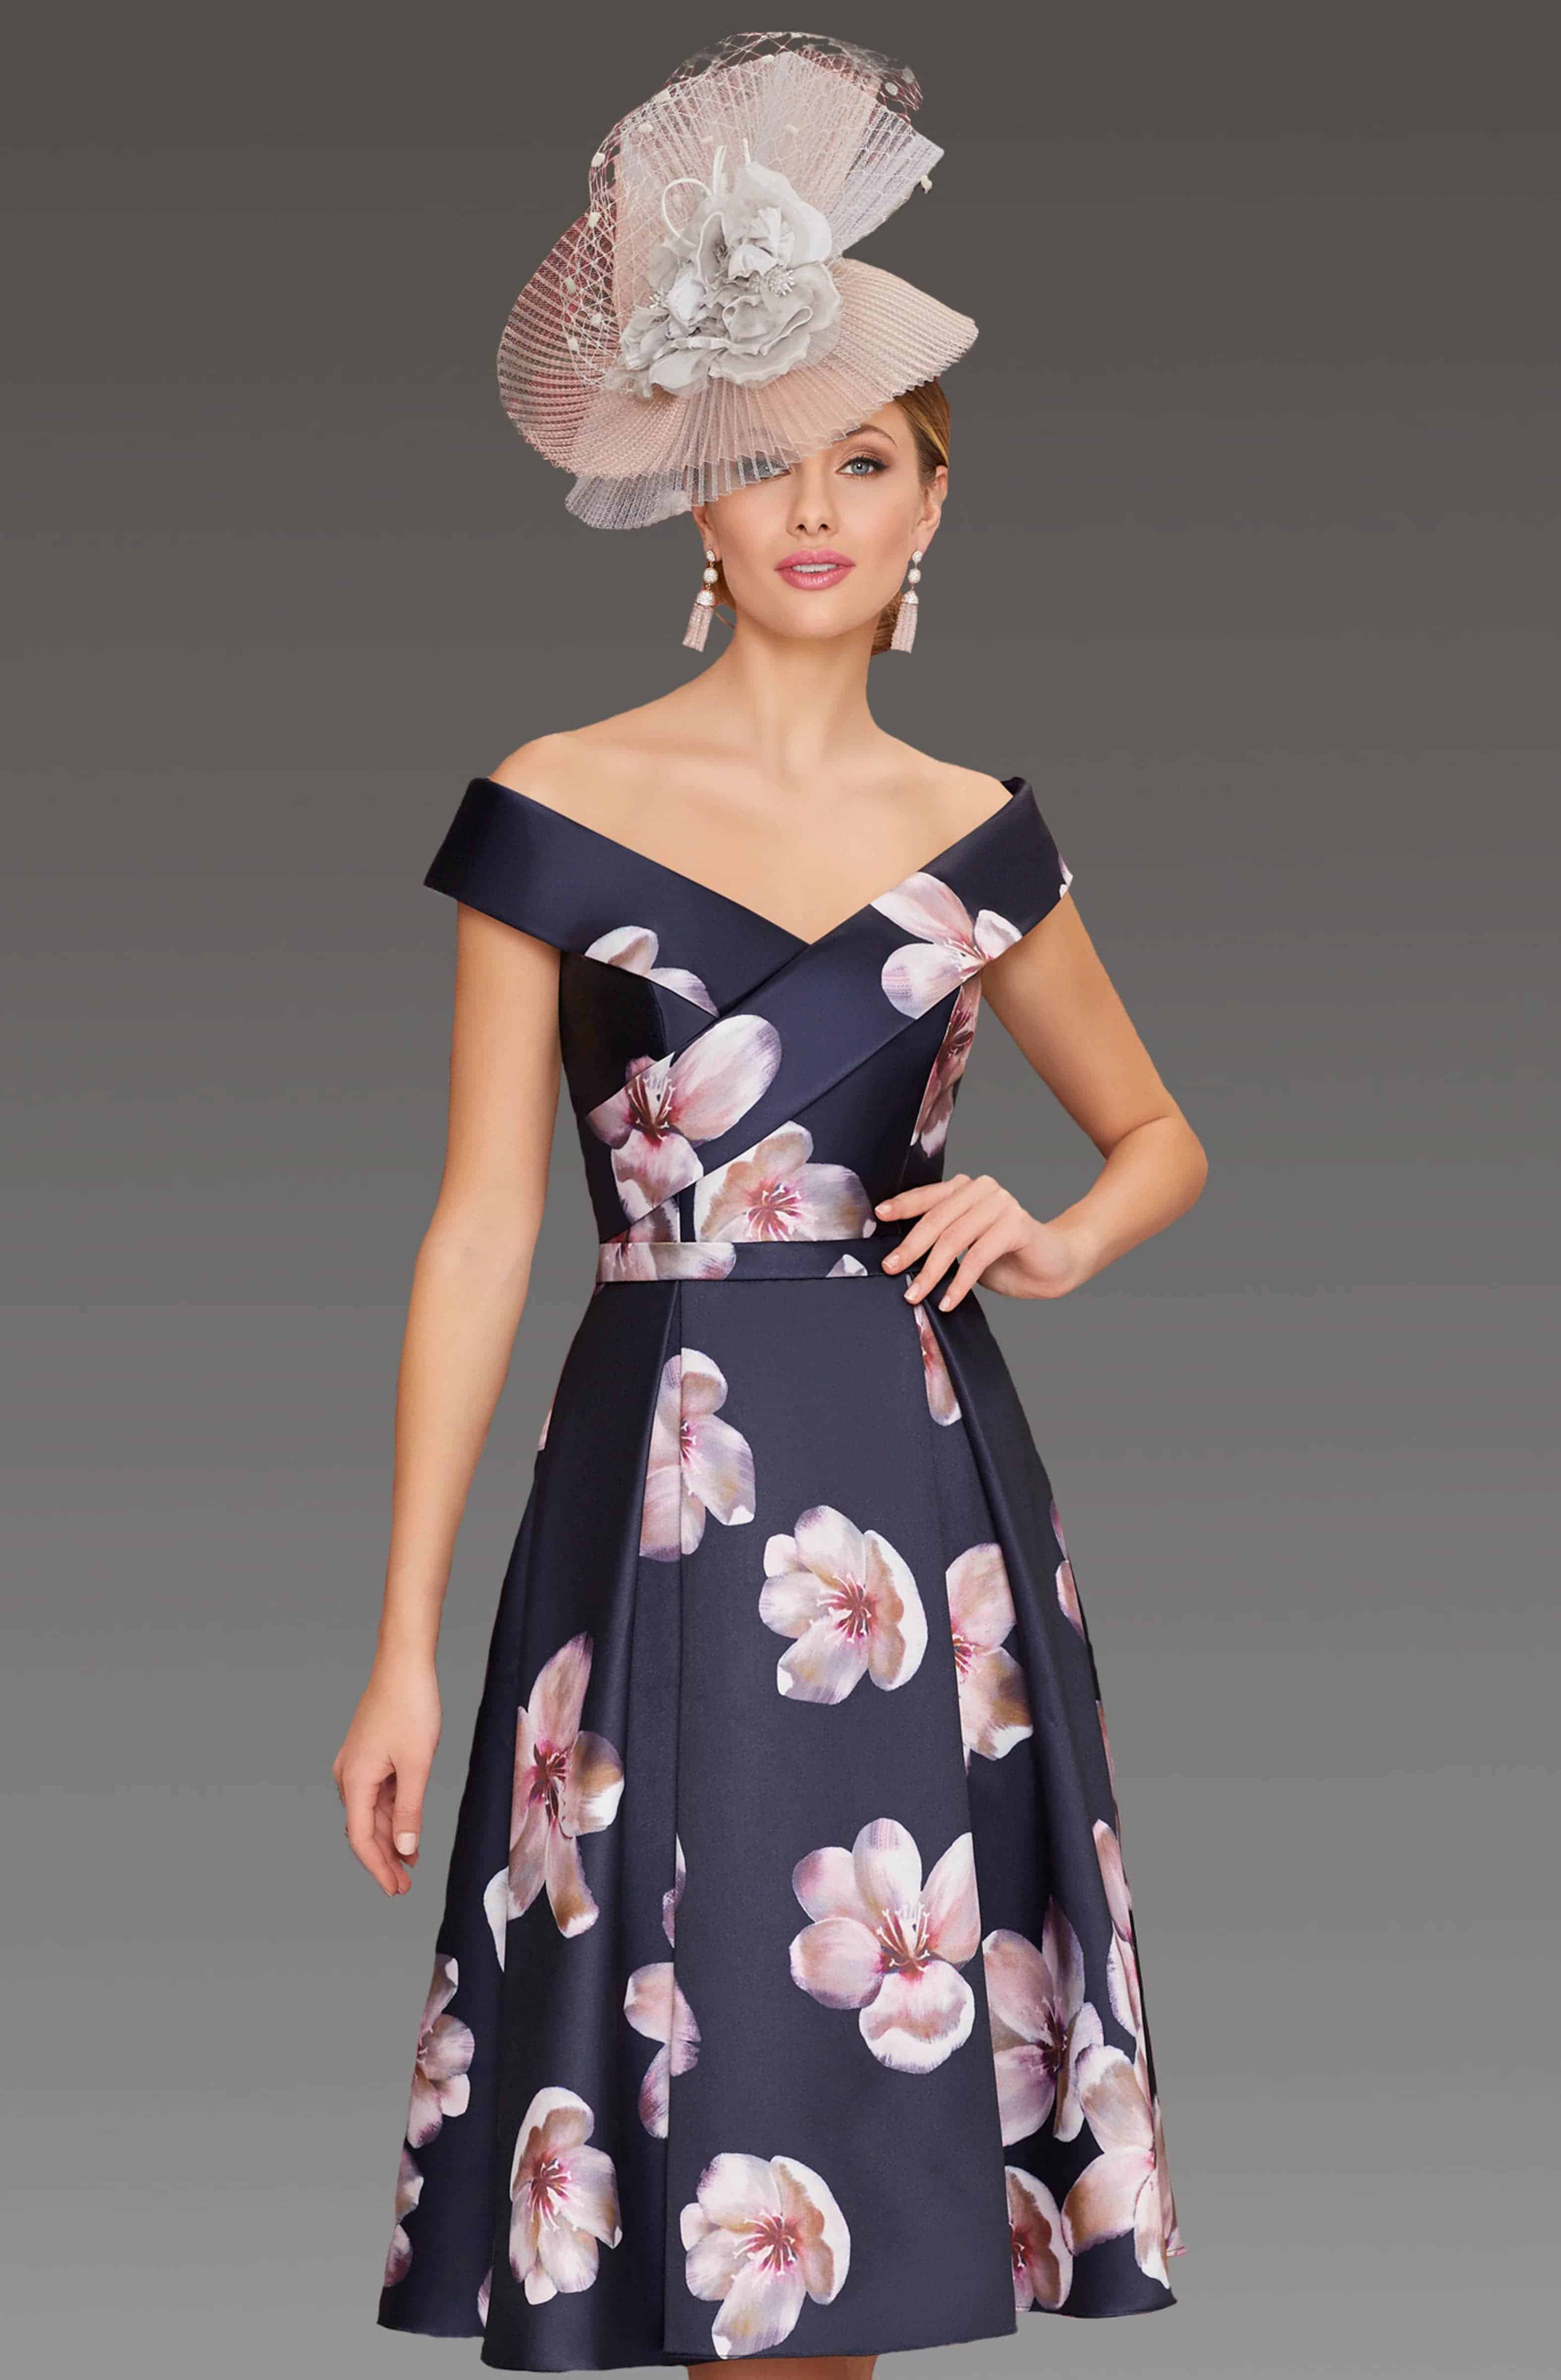 Short floral dress with fuller skirt. 008732 - Catherines of Partick